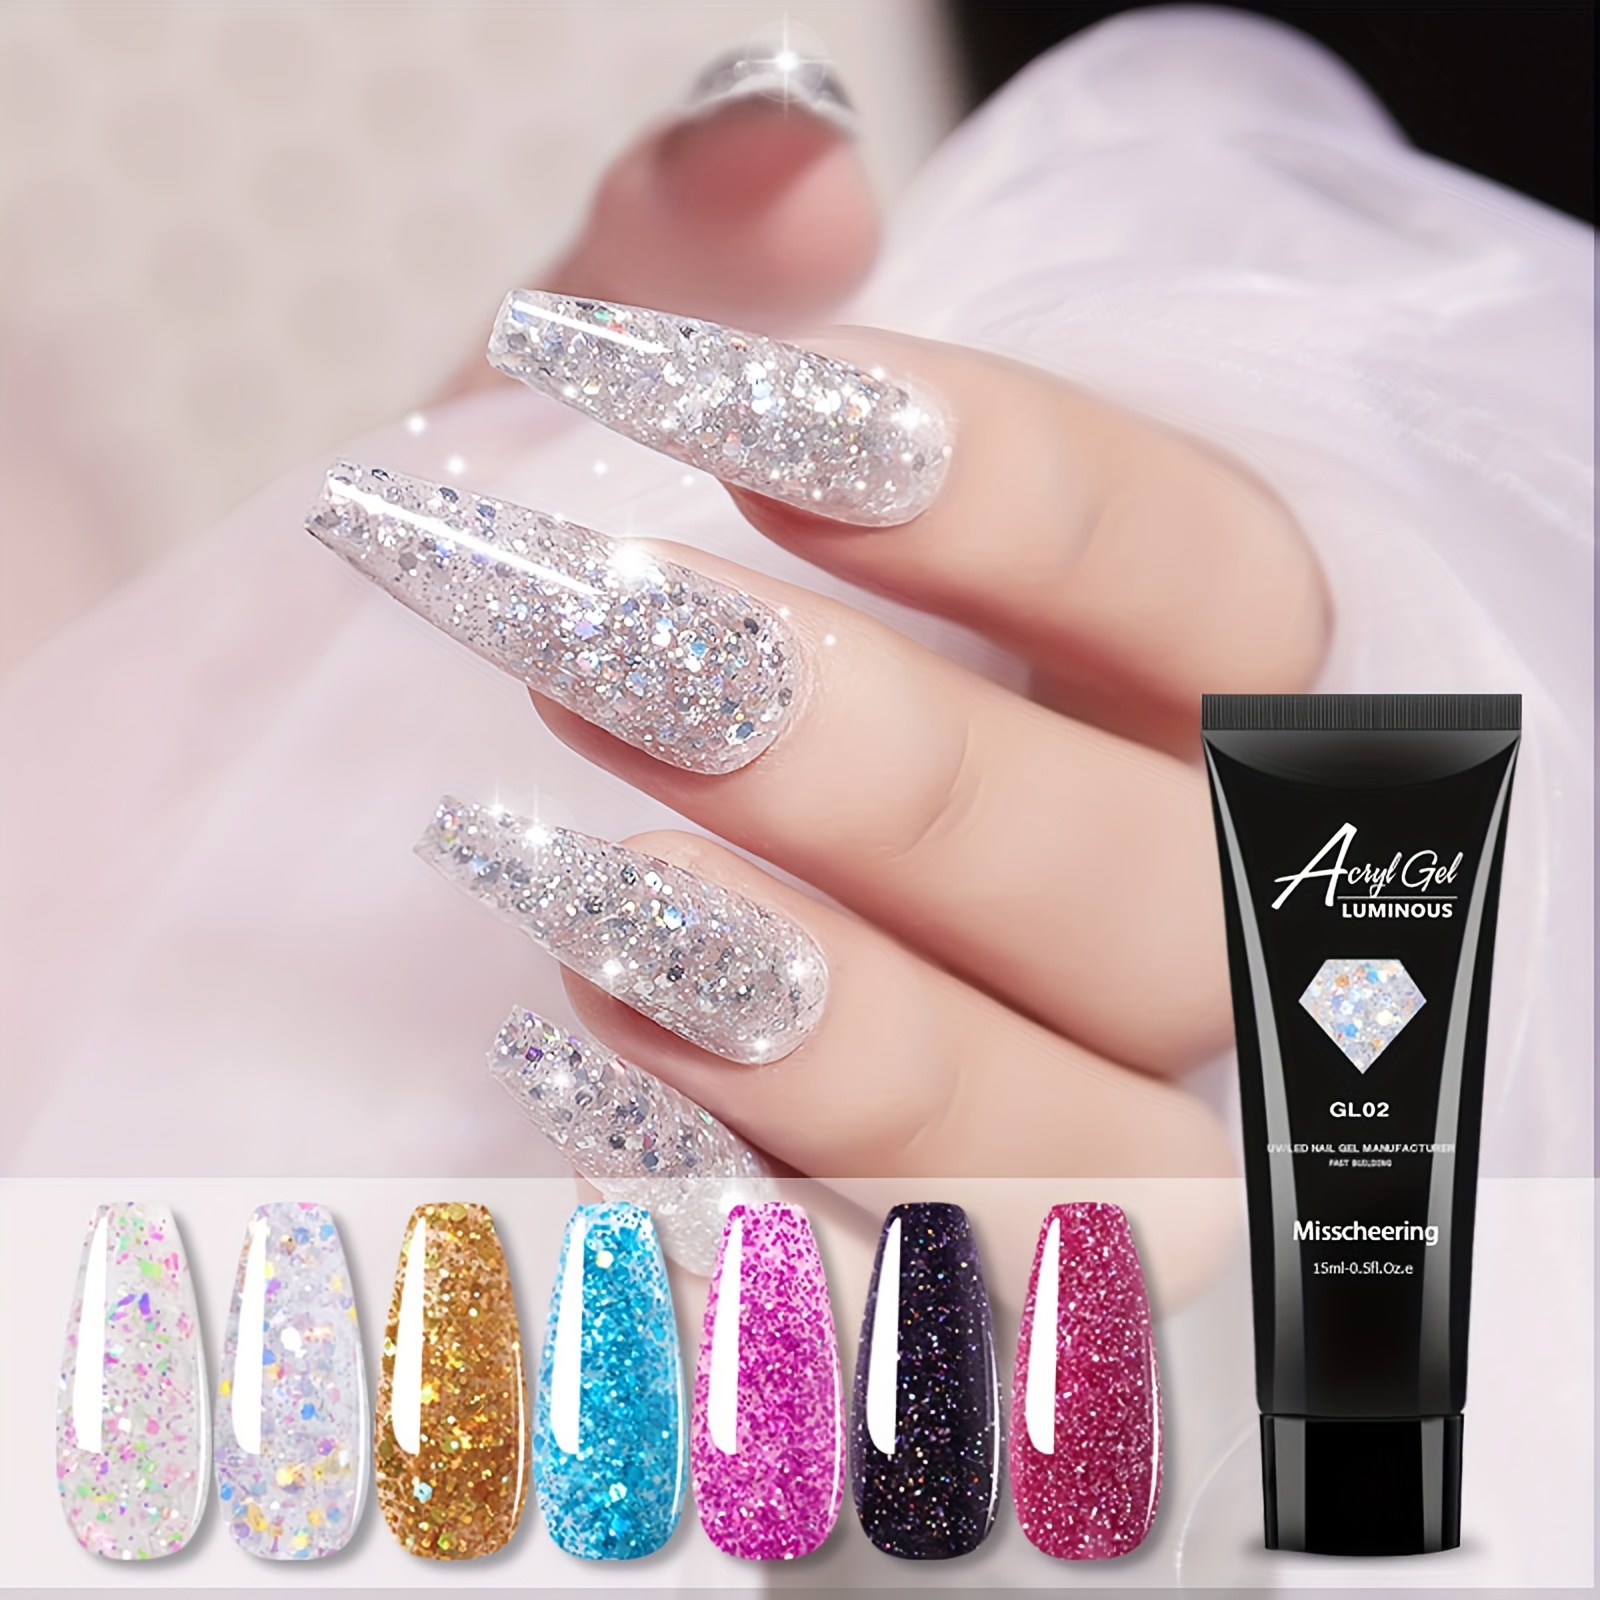 

Acrylic Glitter Gel, 15ml Nail Extension Builder Gel, Shiny Sparkling Long-lasting Uv Led Nail Gel, Nail Art Manicure Kit For Home Use